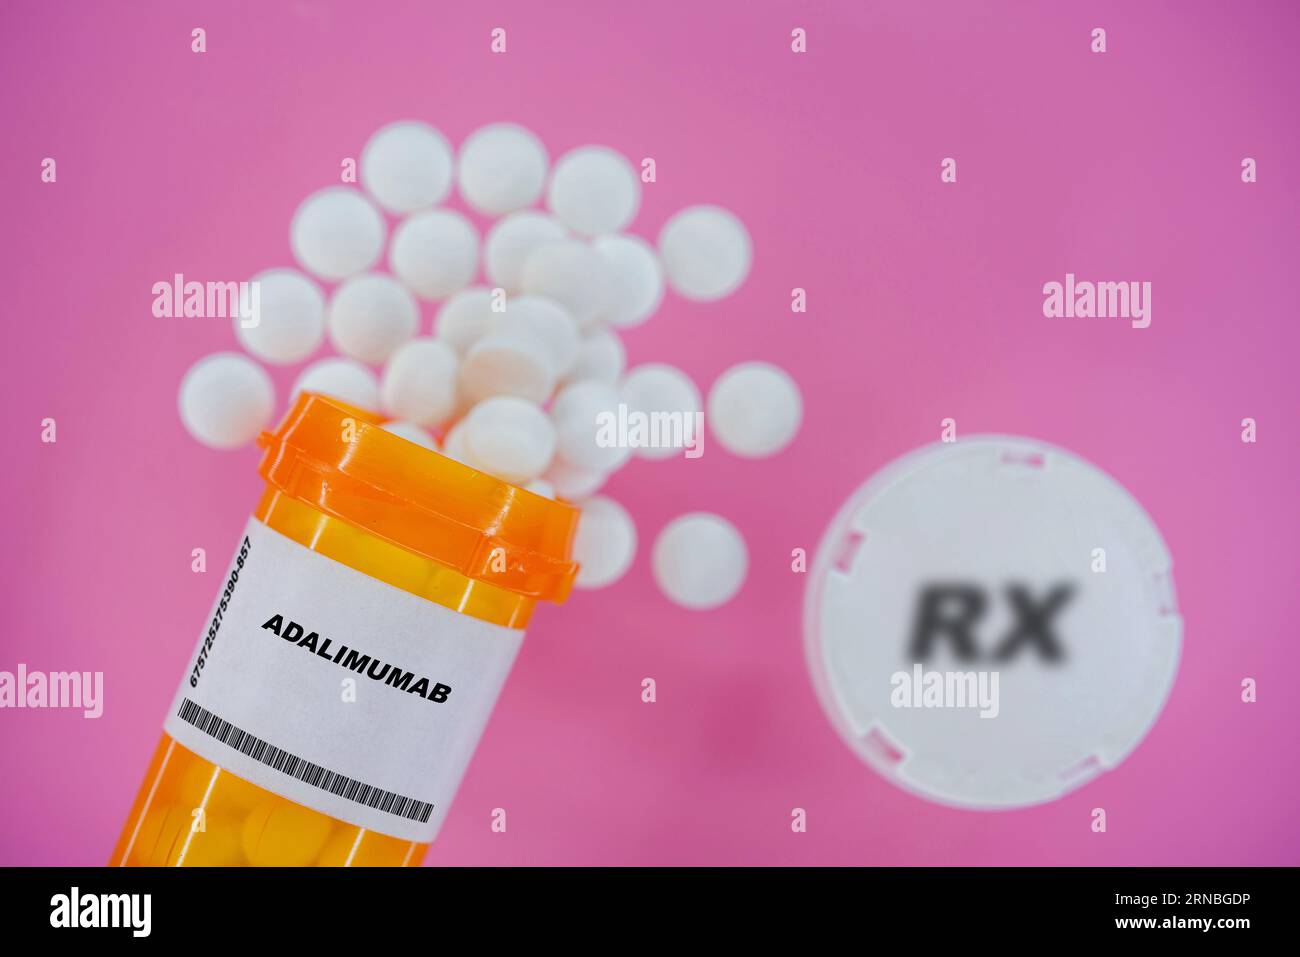 Adalimumab Rx medicine pills in plactic vial with tablets. Pills spilling   from yellow container on pink background. Stock Photo